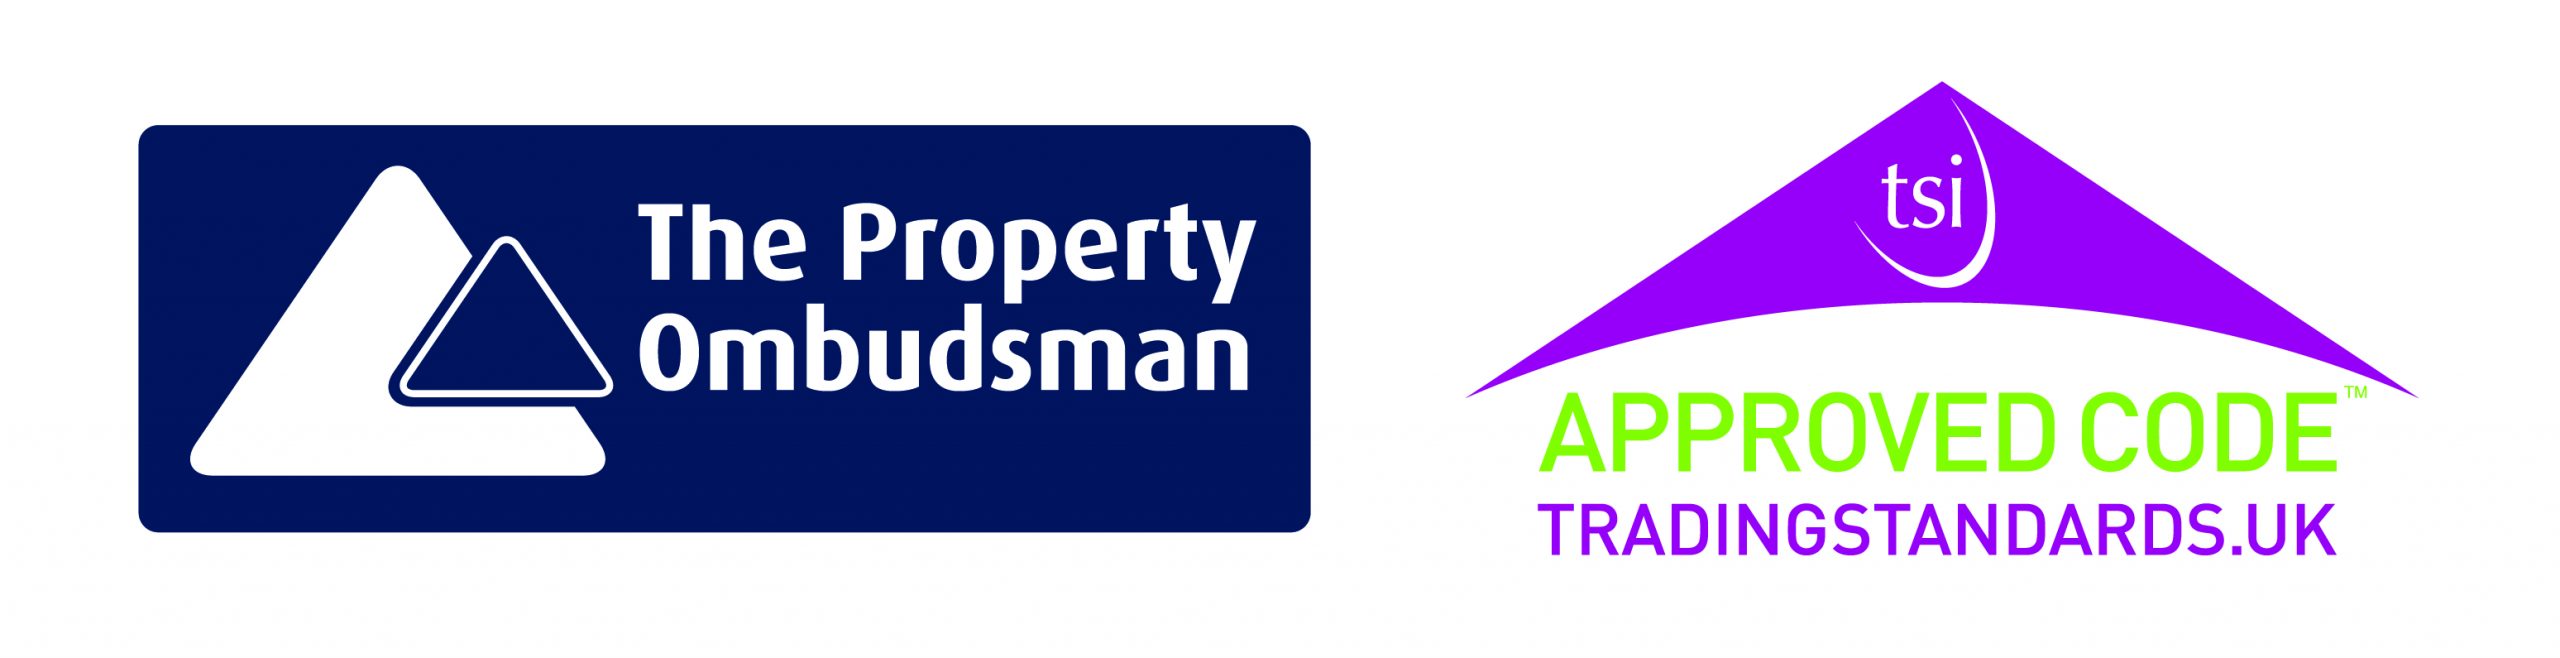 Logo of the The Property Ombudsman